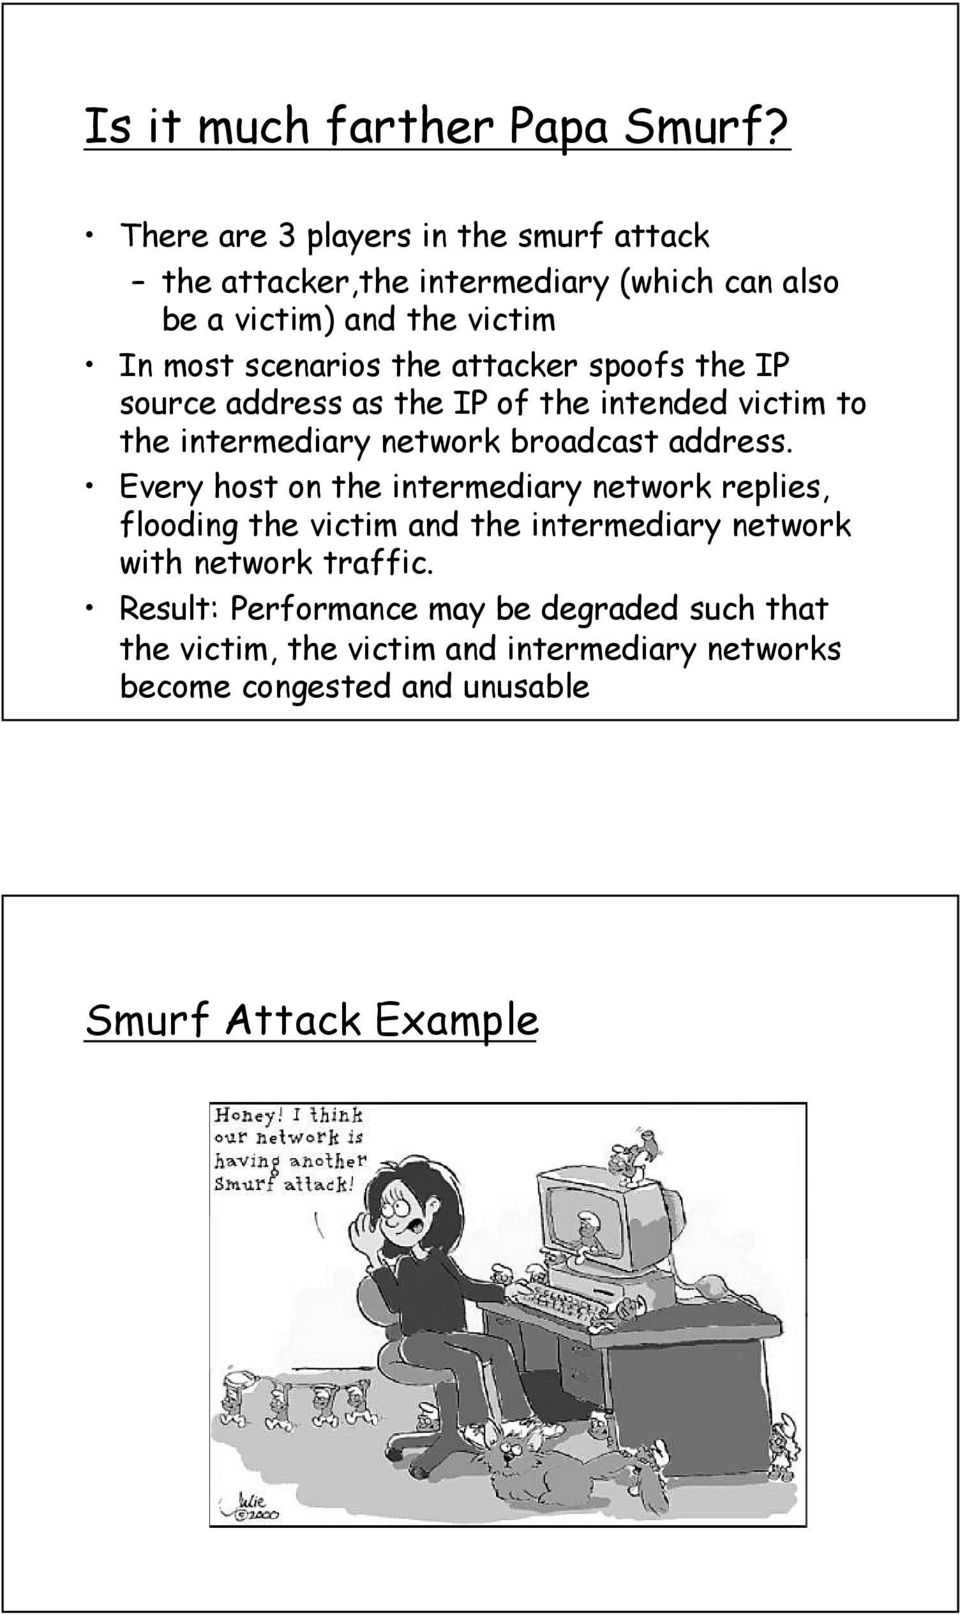 attacker spoofs the IP source address as the IP of the intended victim to the intermediary network broadcast address.